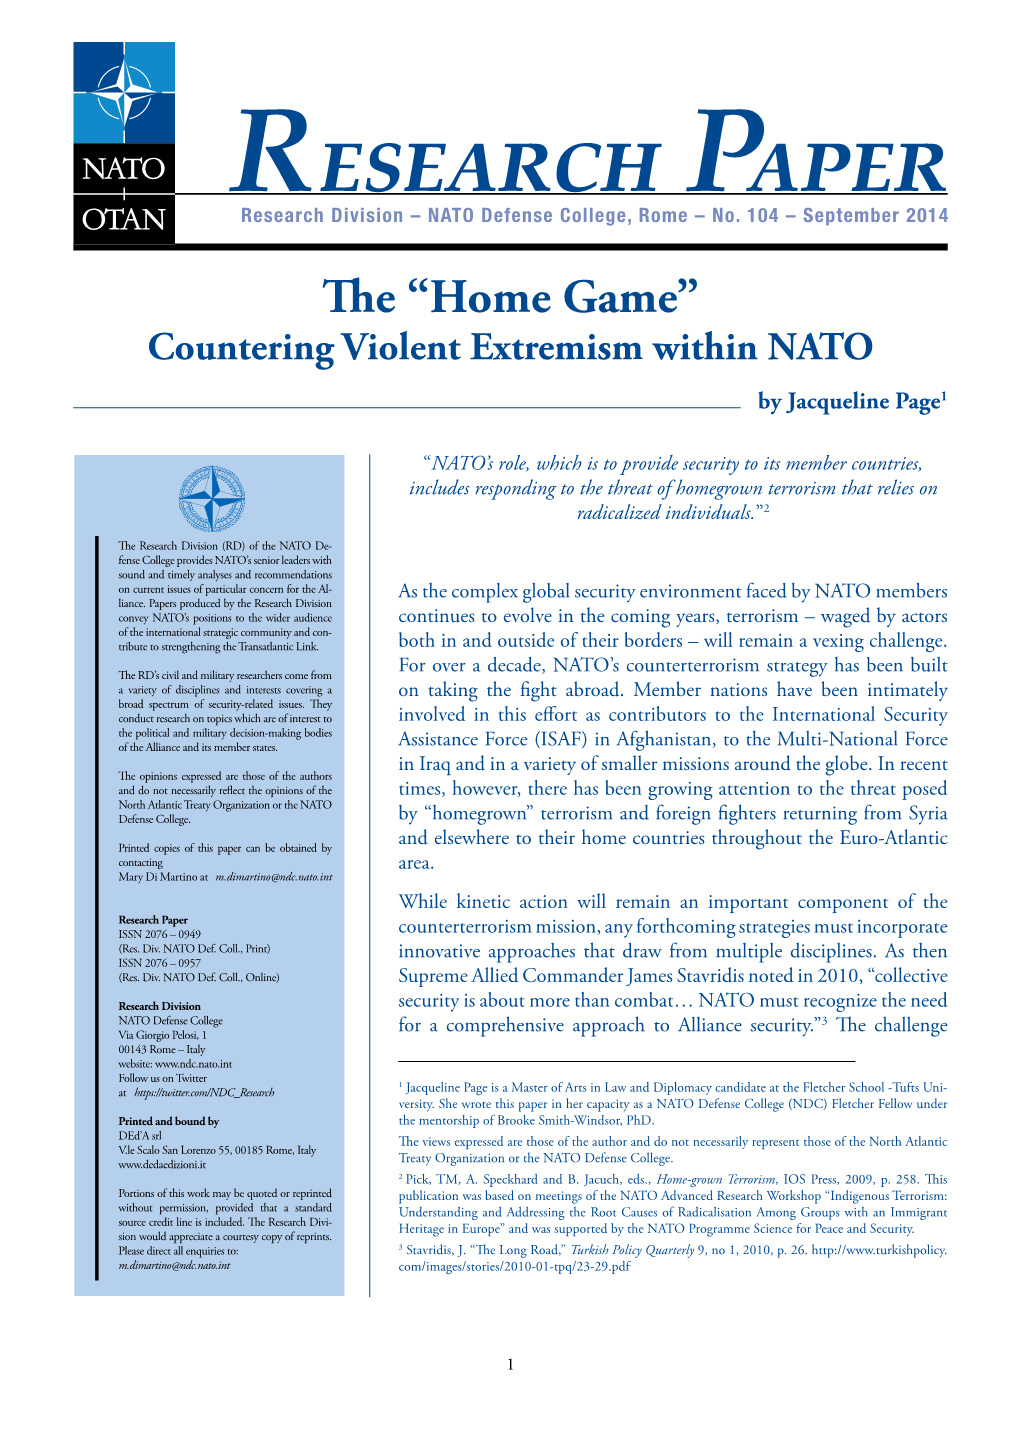 The "Home Game": Countering Violent Extremism Within NATO